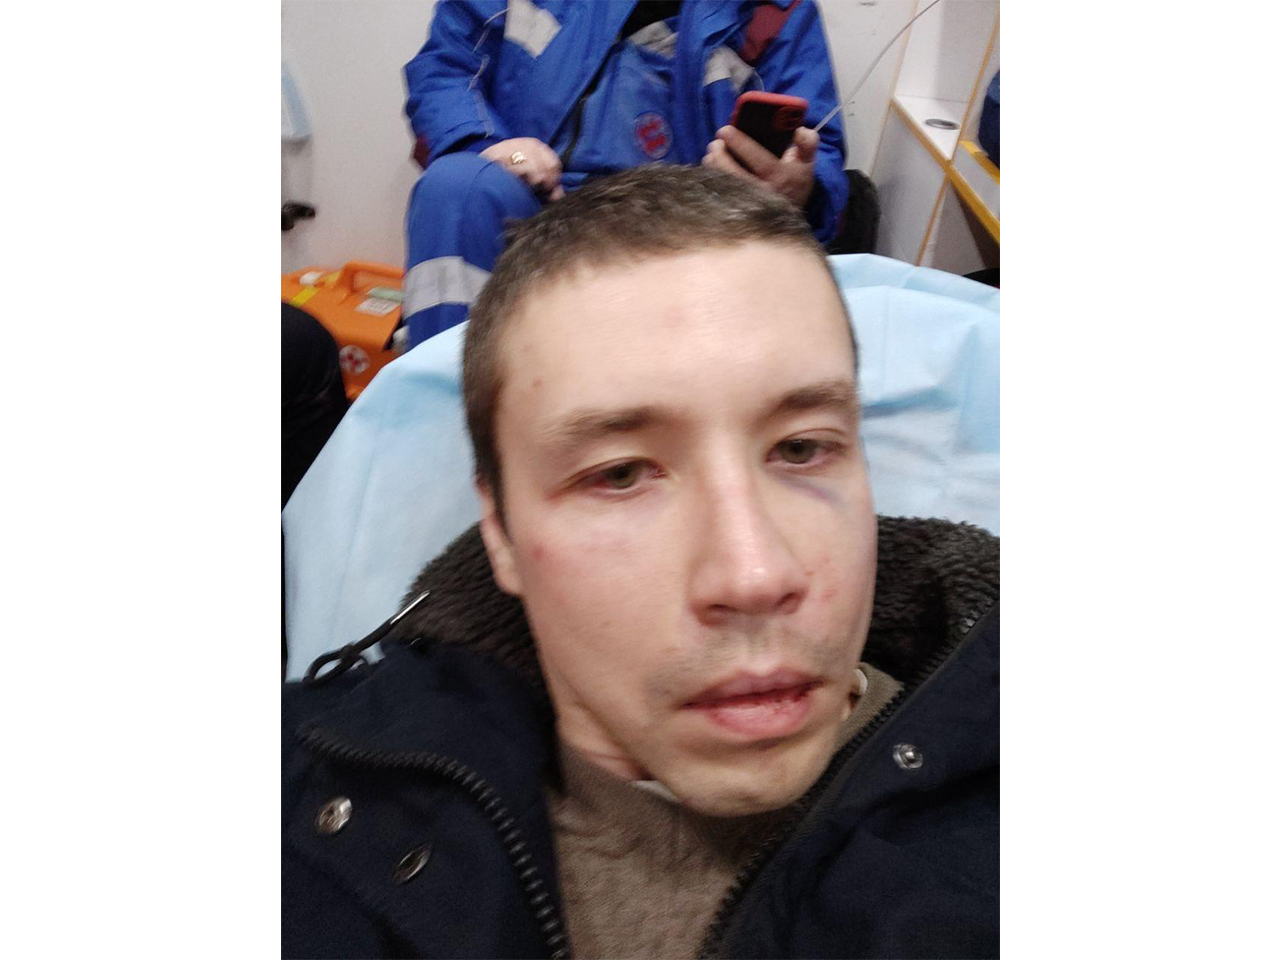 Anton Mishchenko, detained in Moscow, said that he was beaten for filming police officers at the Marino police station. According to the ambulance doctors, Mishchenko has a concussion. March 6, 2022 / Photo provided by Mishchenko